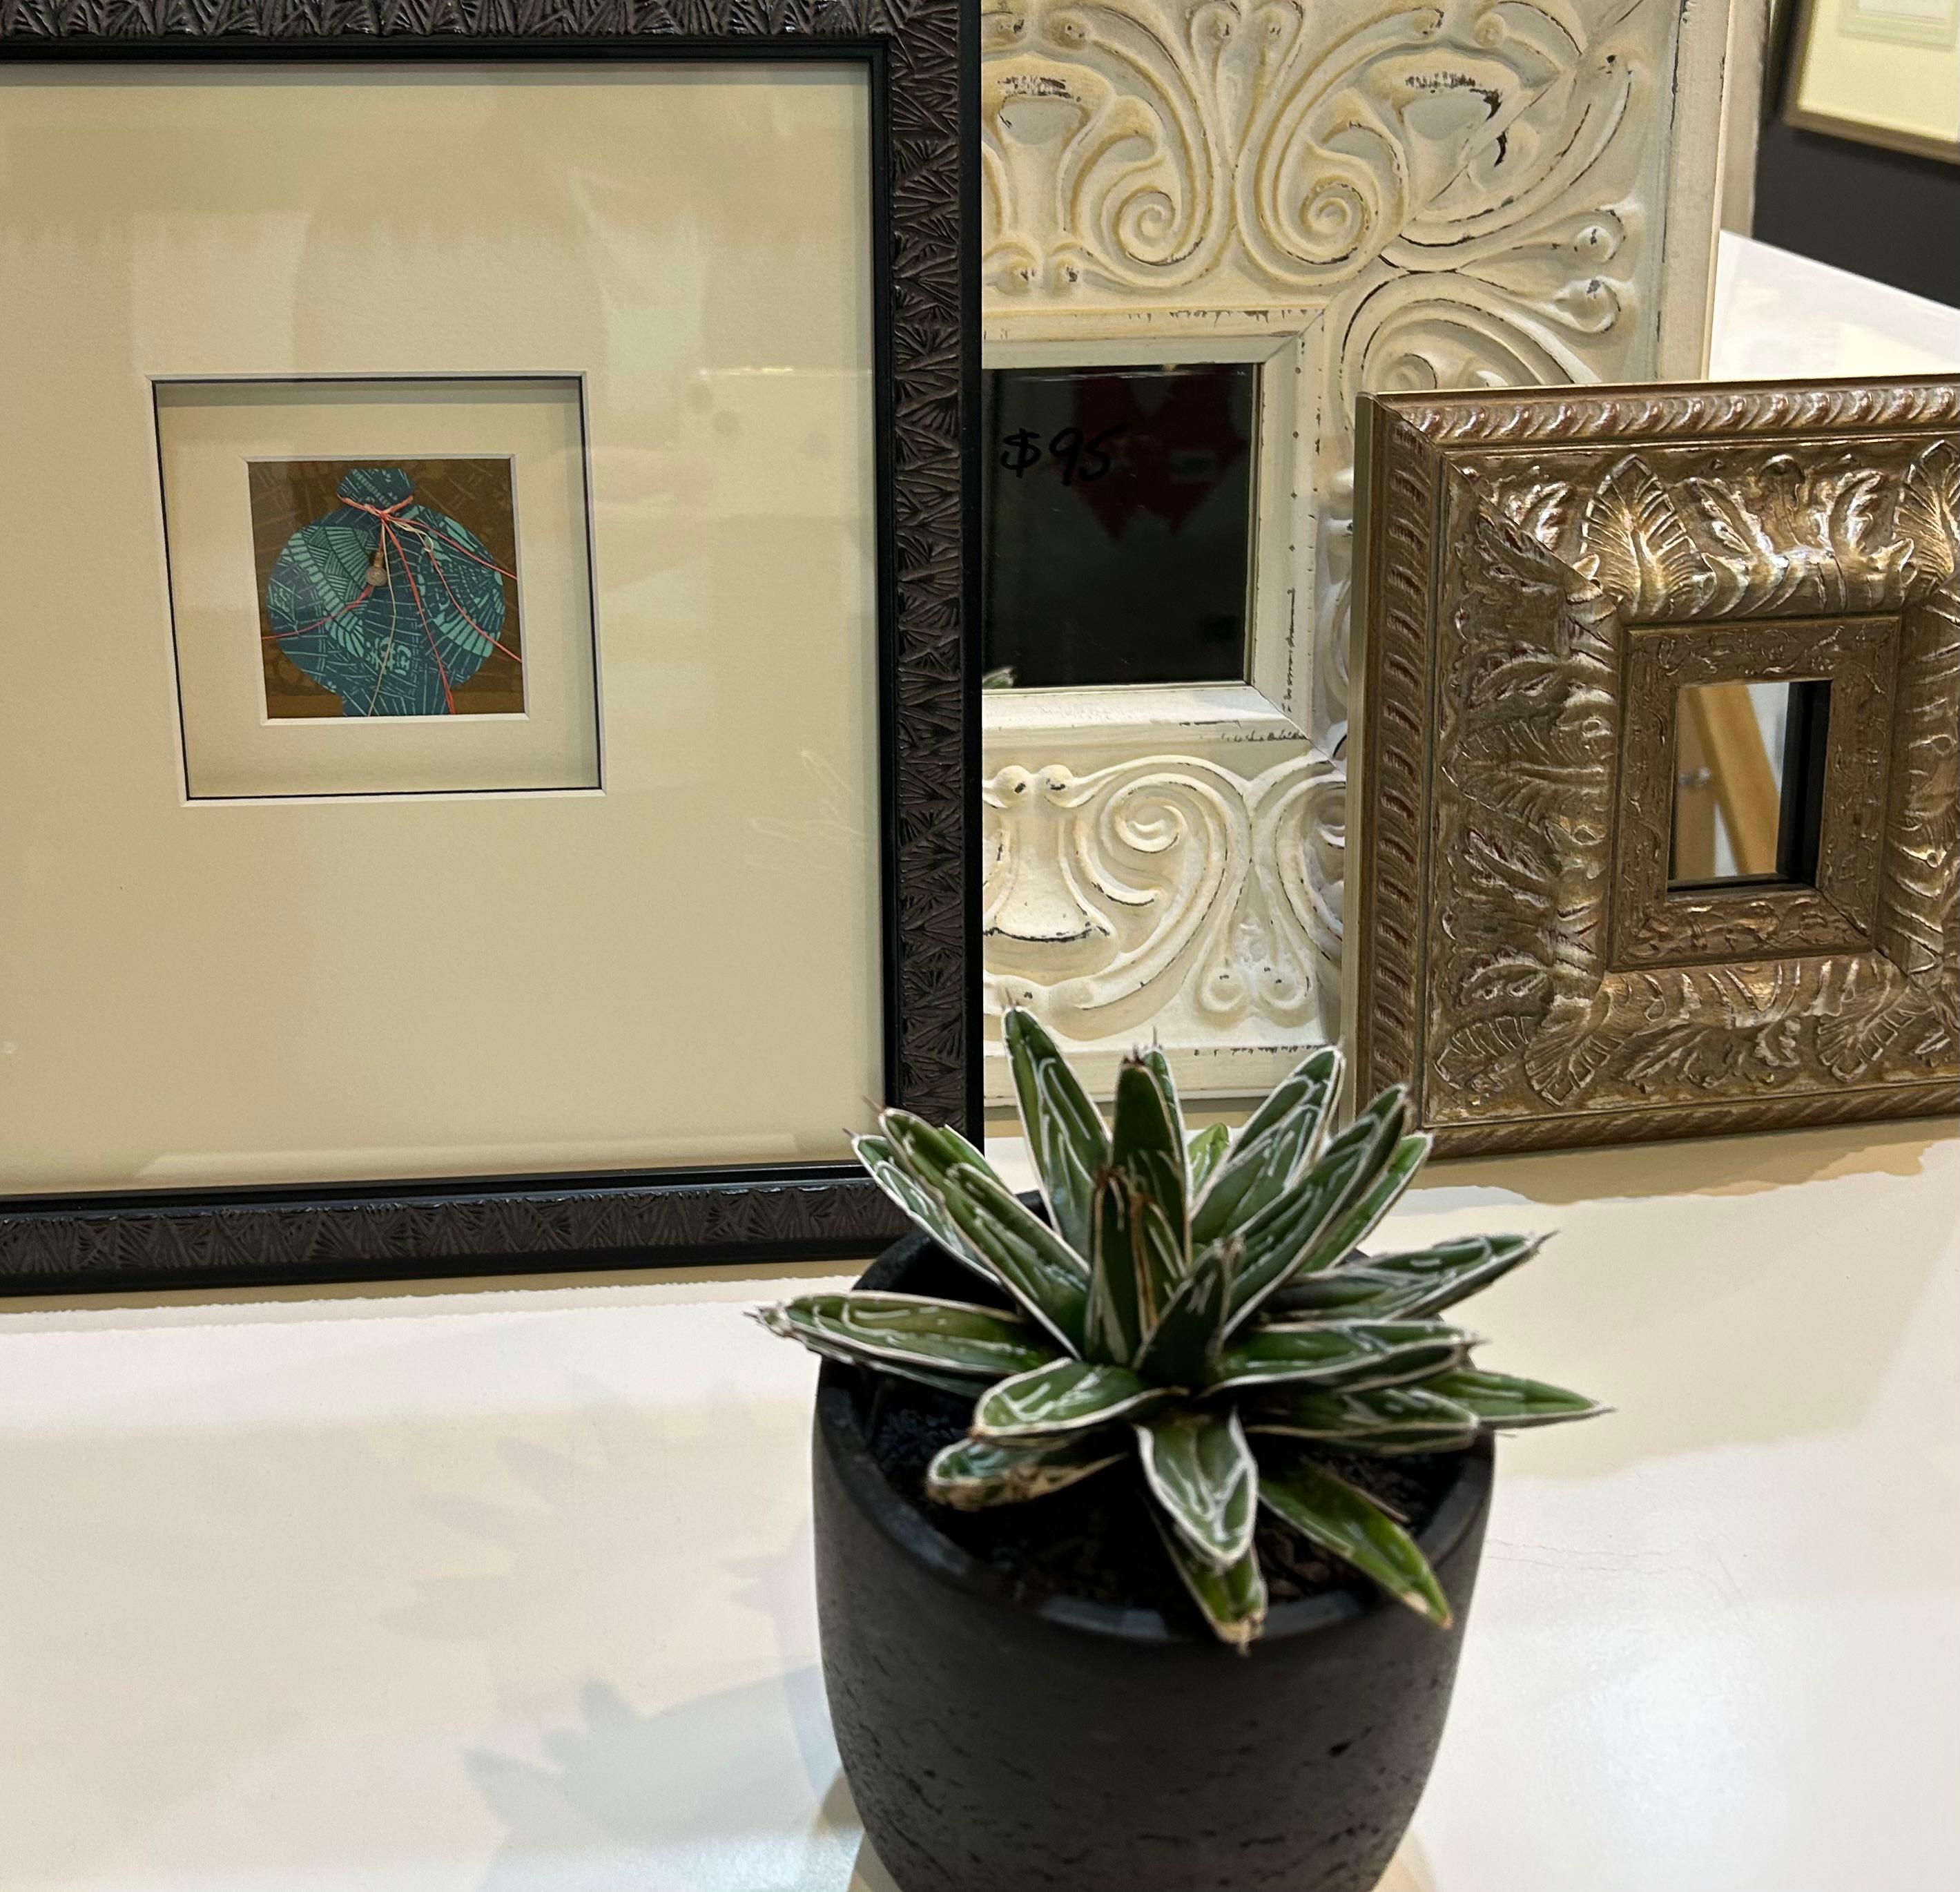 Images Framing on a Budget